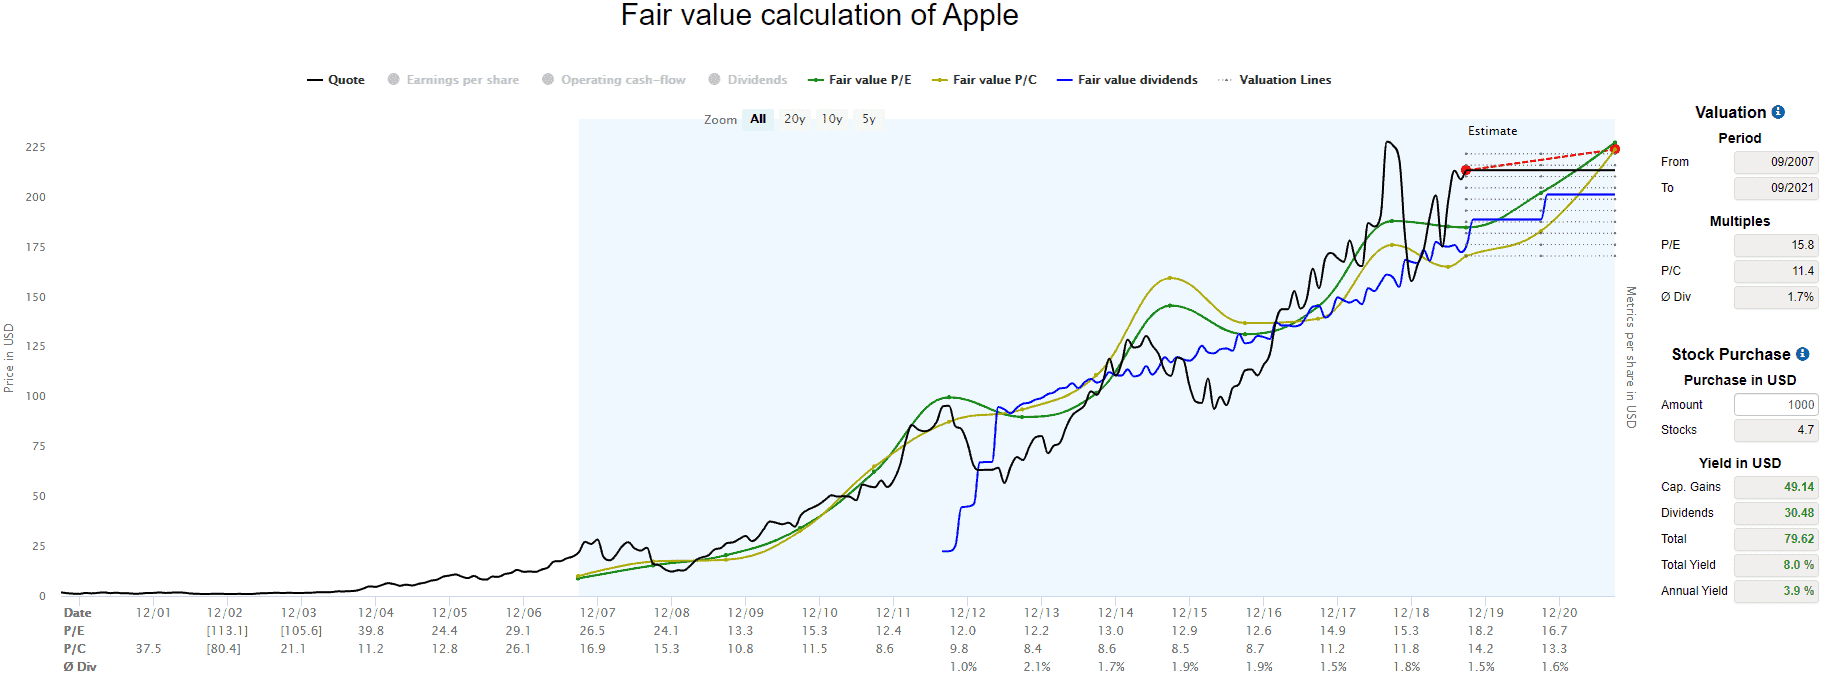 Apple's fair value calculation based on current phase beginning in 2007